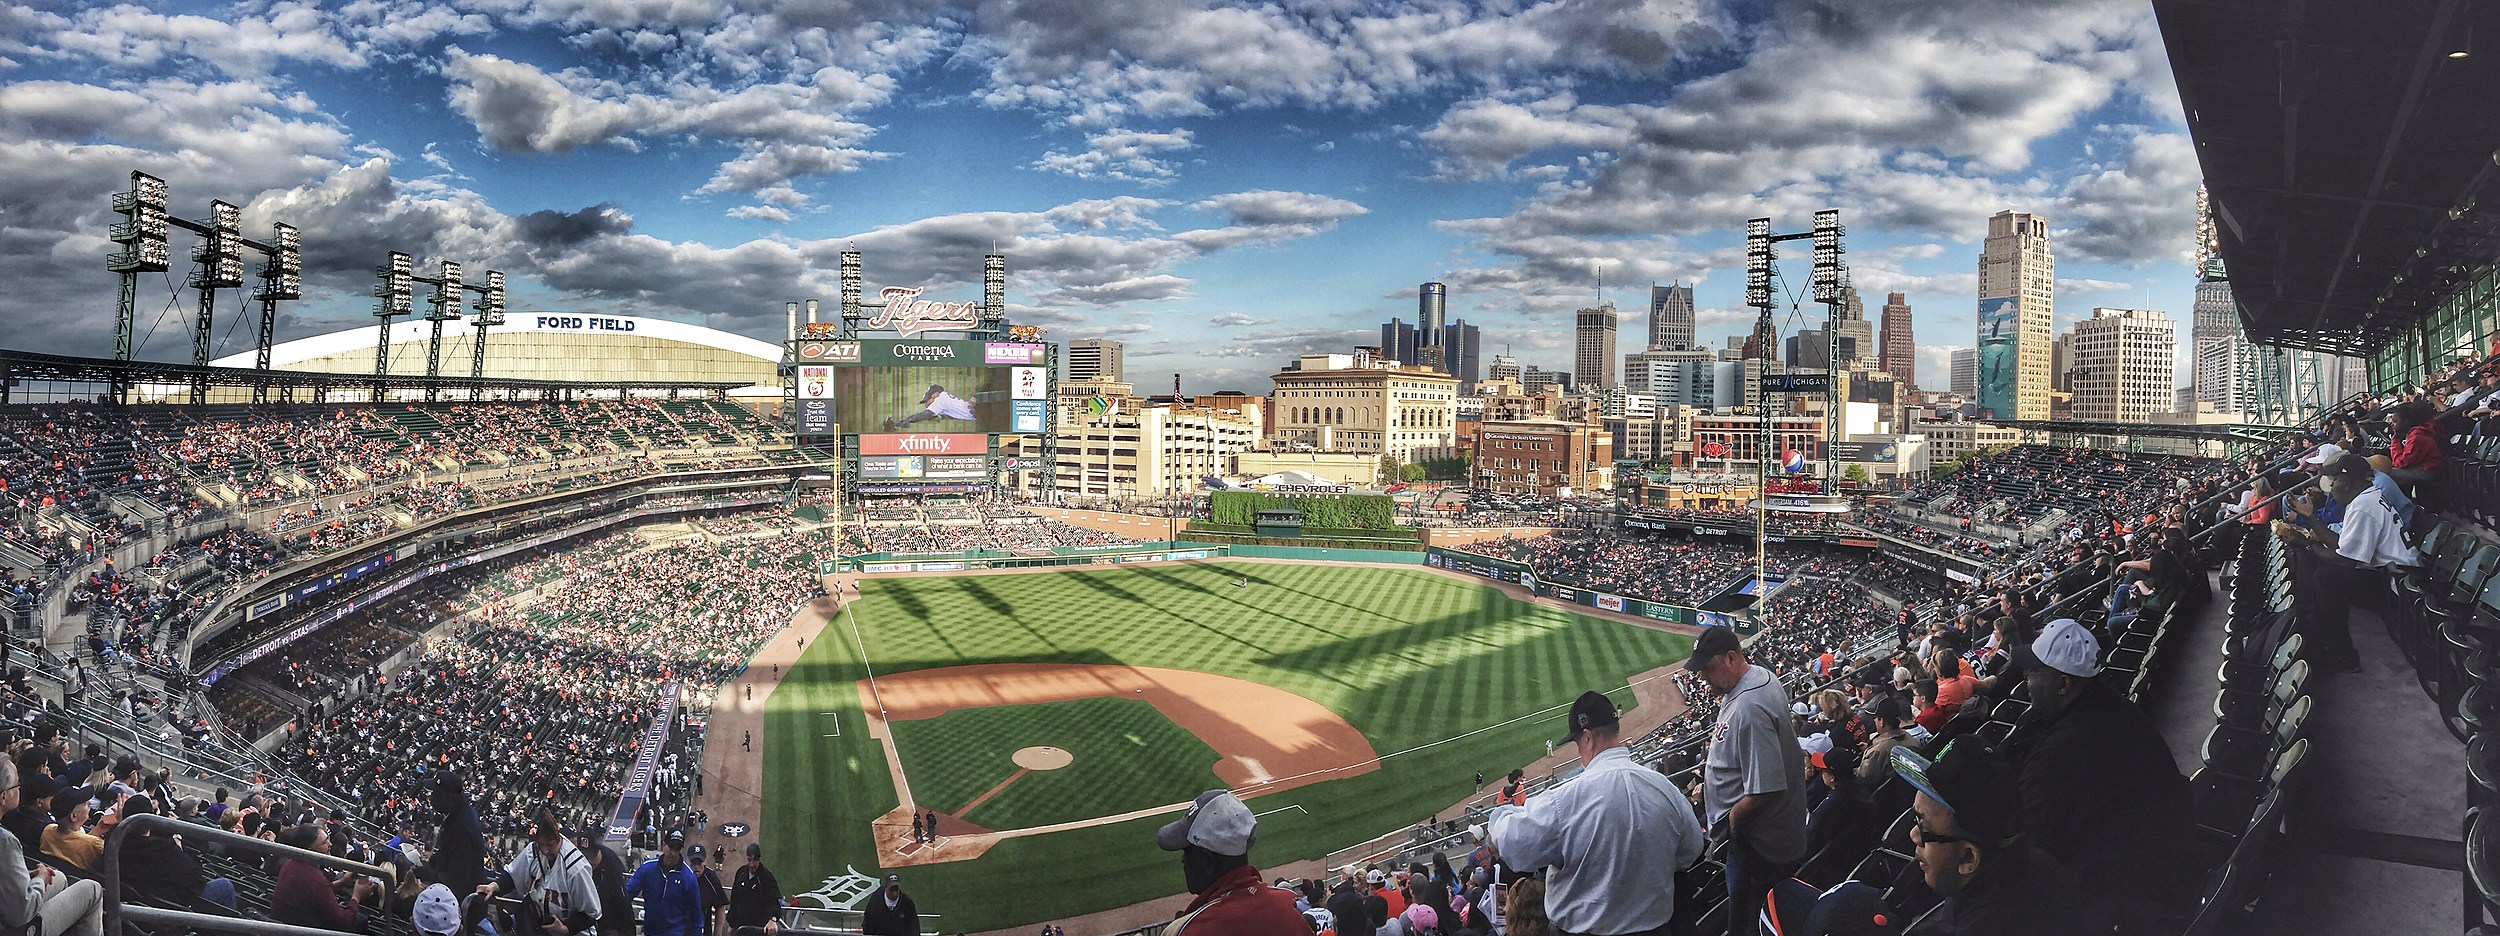 Comerica Park capacity increases to 20 percent, opening day April